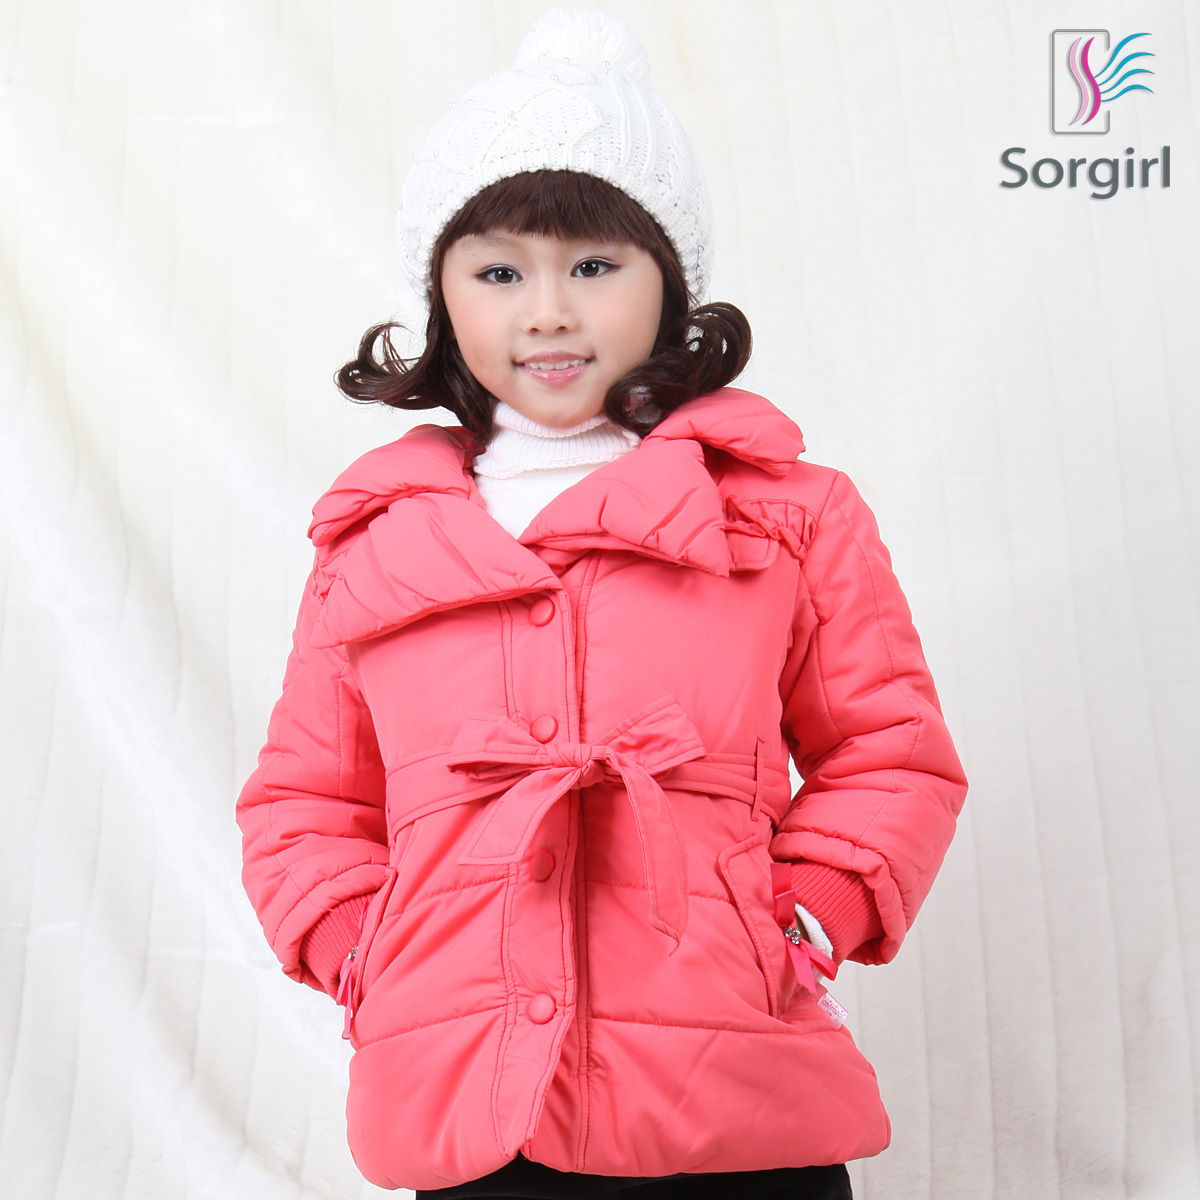 Children's clothing 2012 girls autumn and winter clothing cotton-padded jacket child thickening outerwear 34029